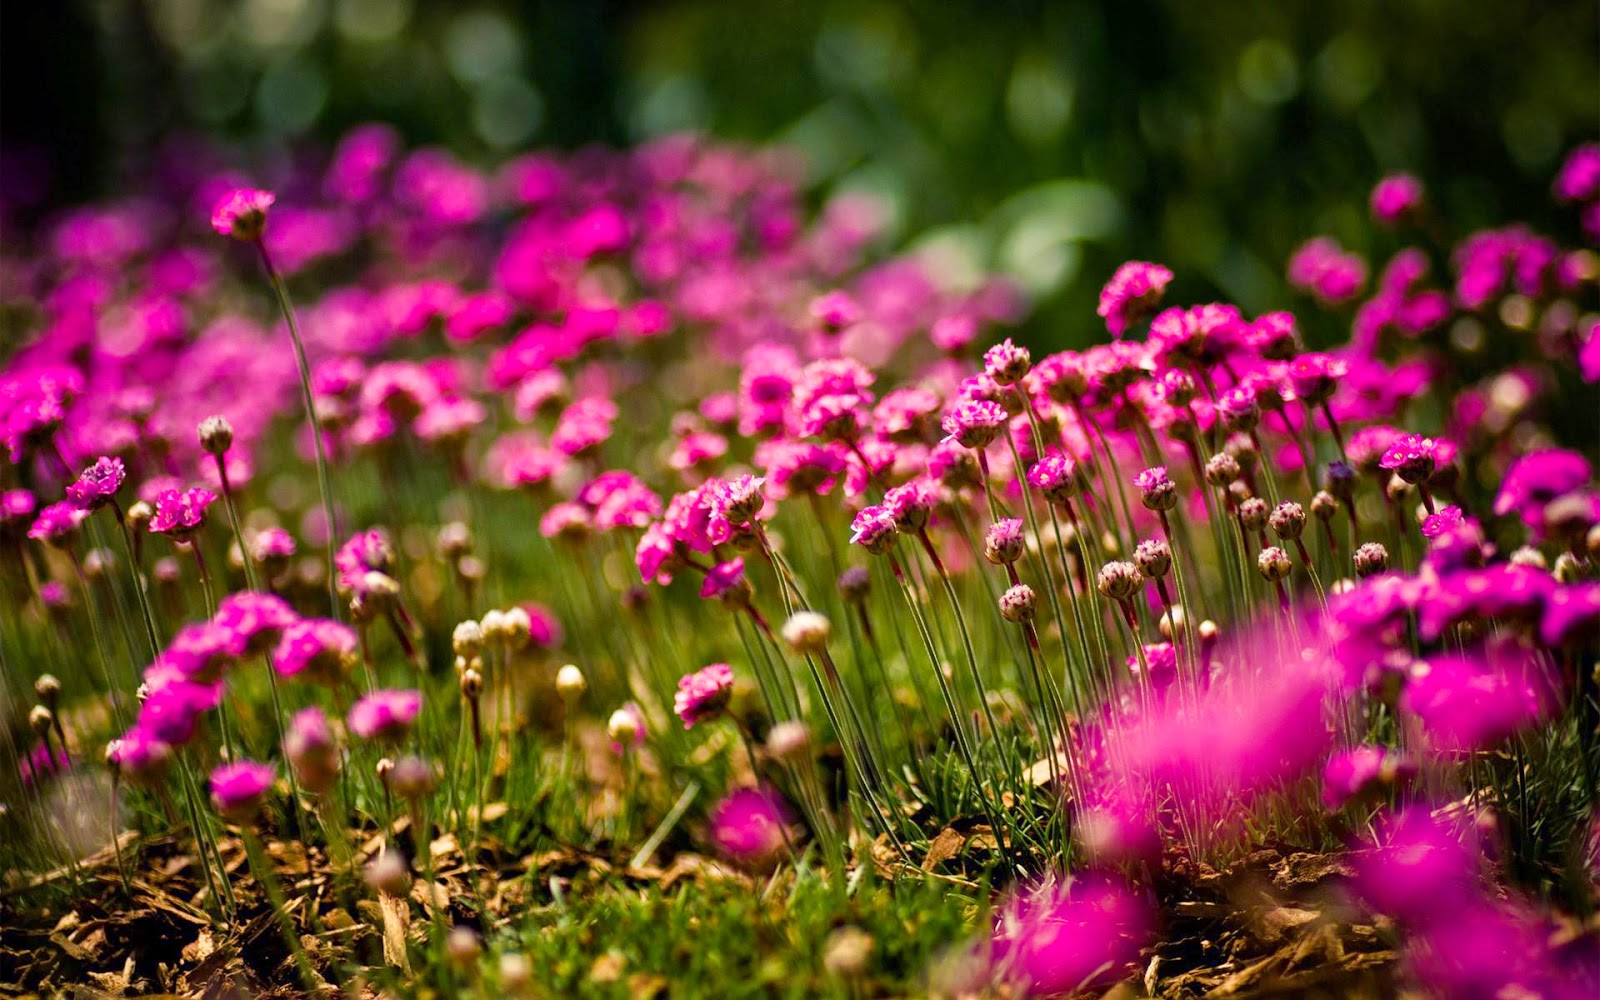 Sunny Nature Flowers Field Wallpapers - HD Wallpapers and Images